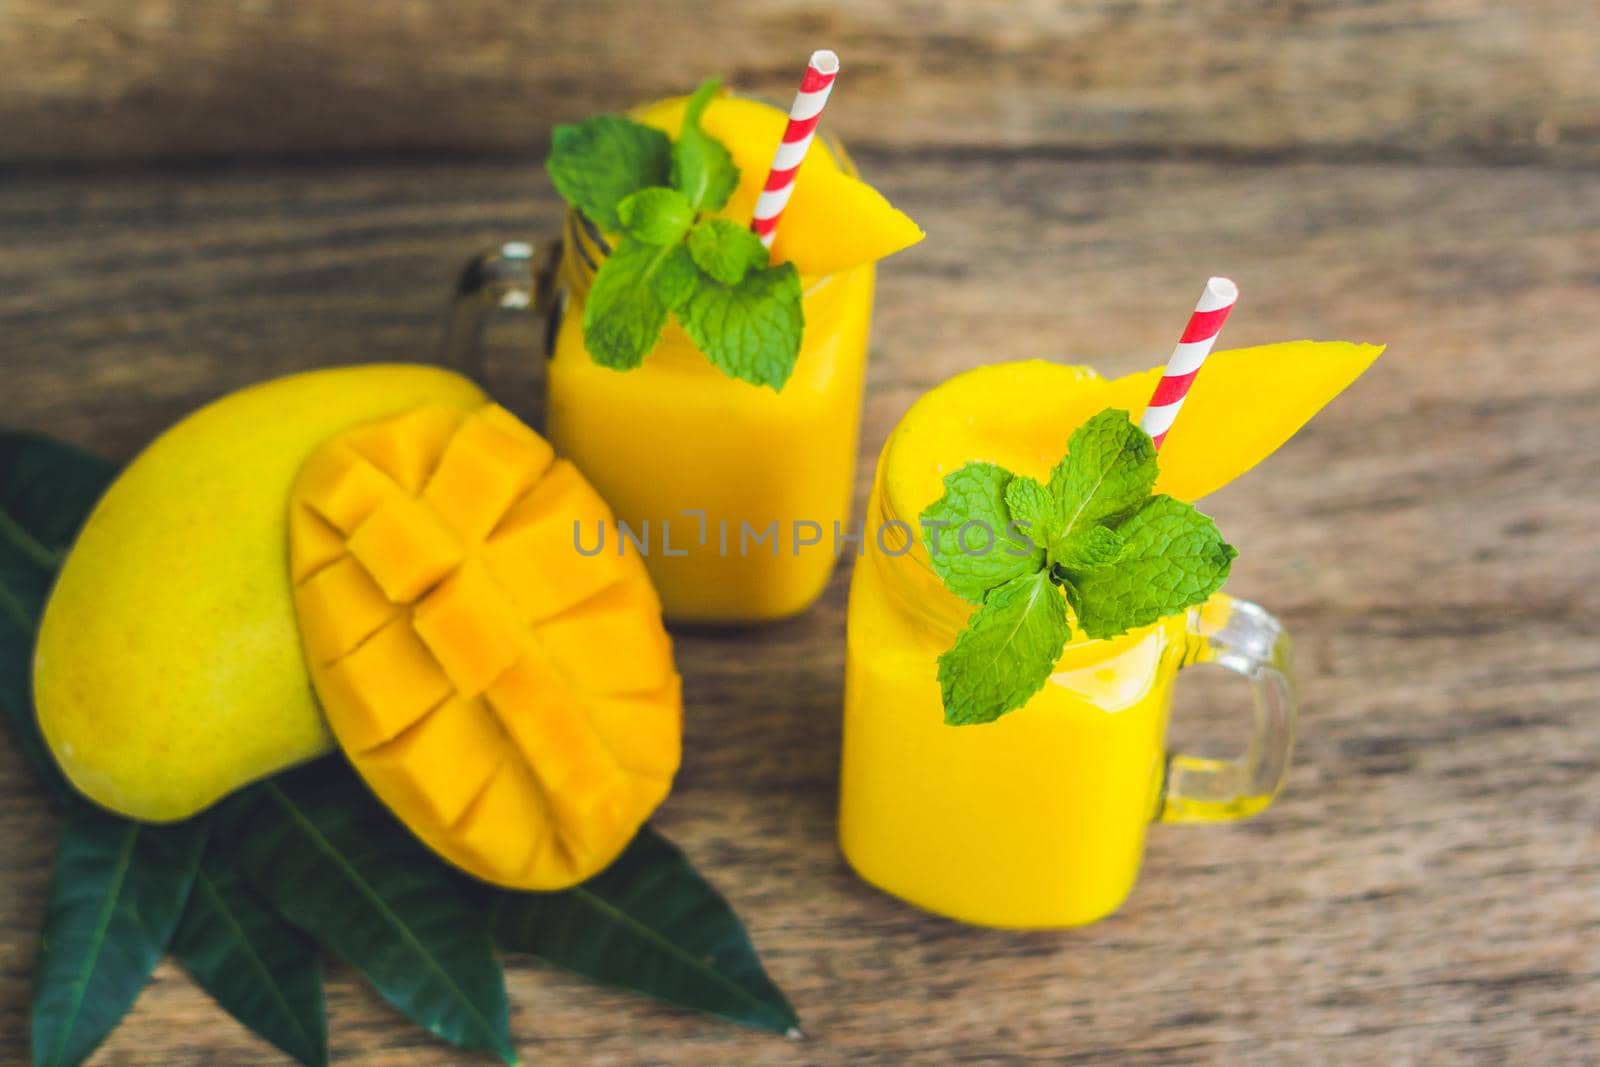 Juicy smoothie from mango in two glass mason jars with striped red straw on old wooden background. Healthy life concept, copy space.